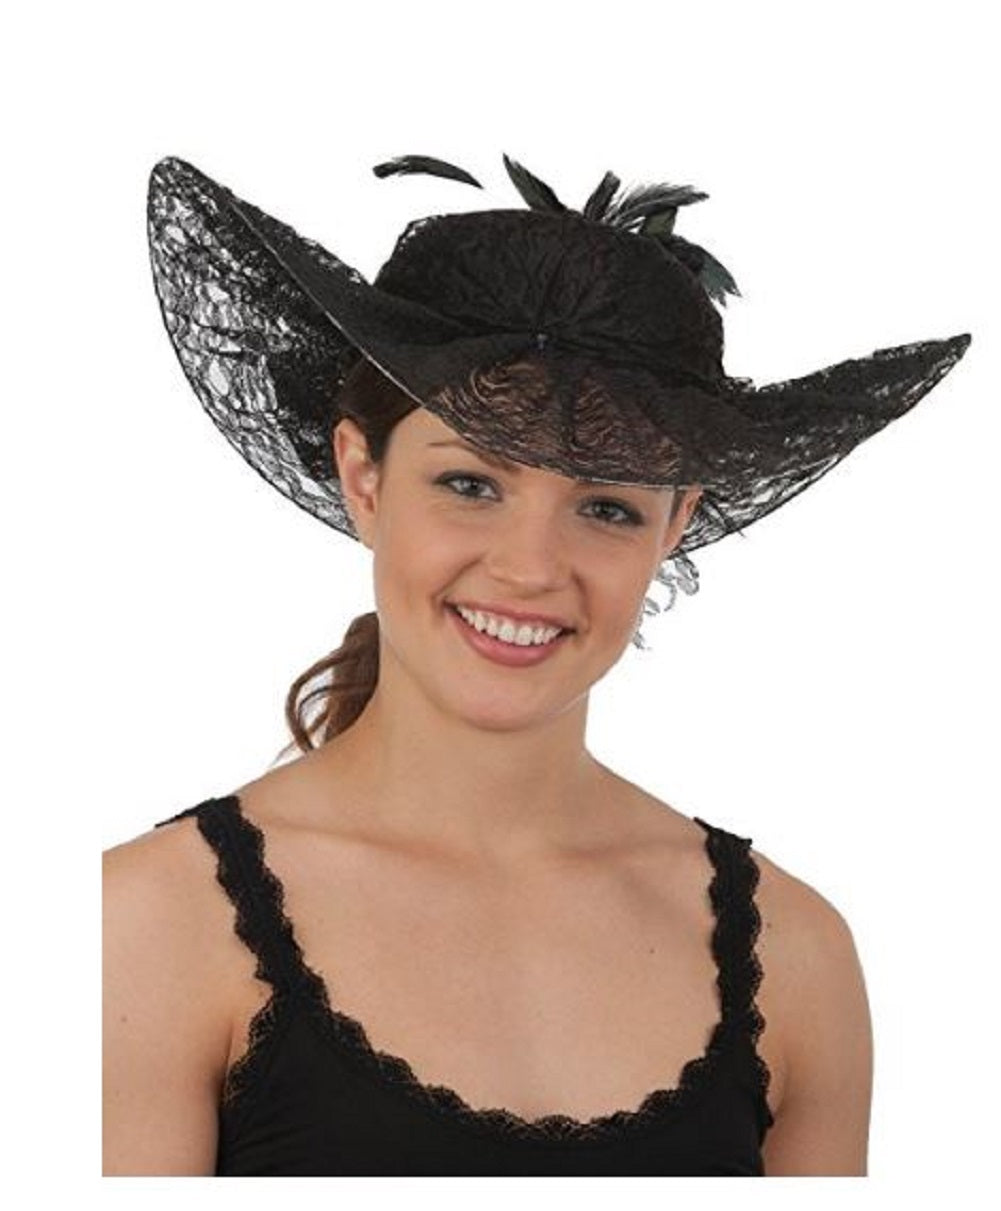 Kentucky Derby Hat - Black - Feathers - Southern Belle - Costume Accessory